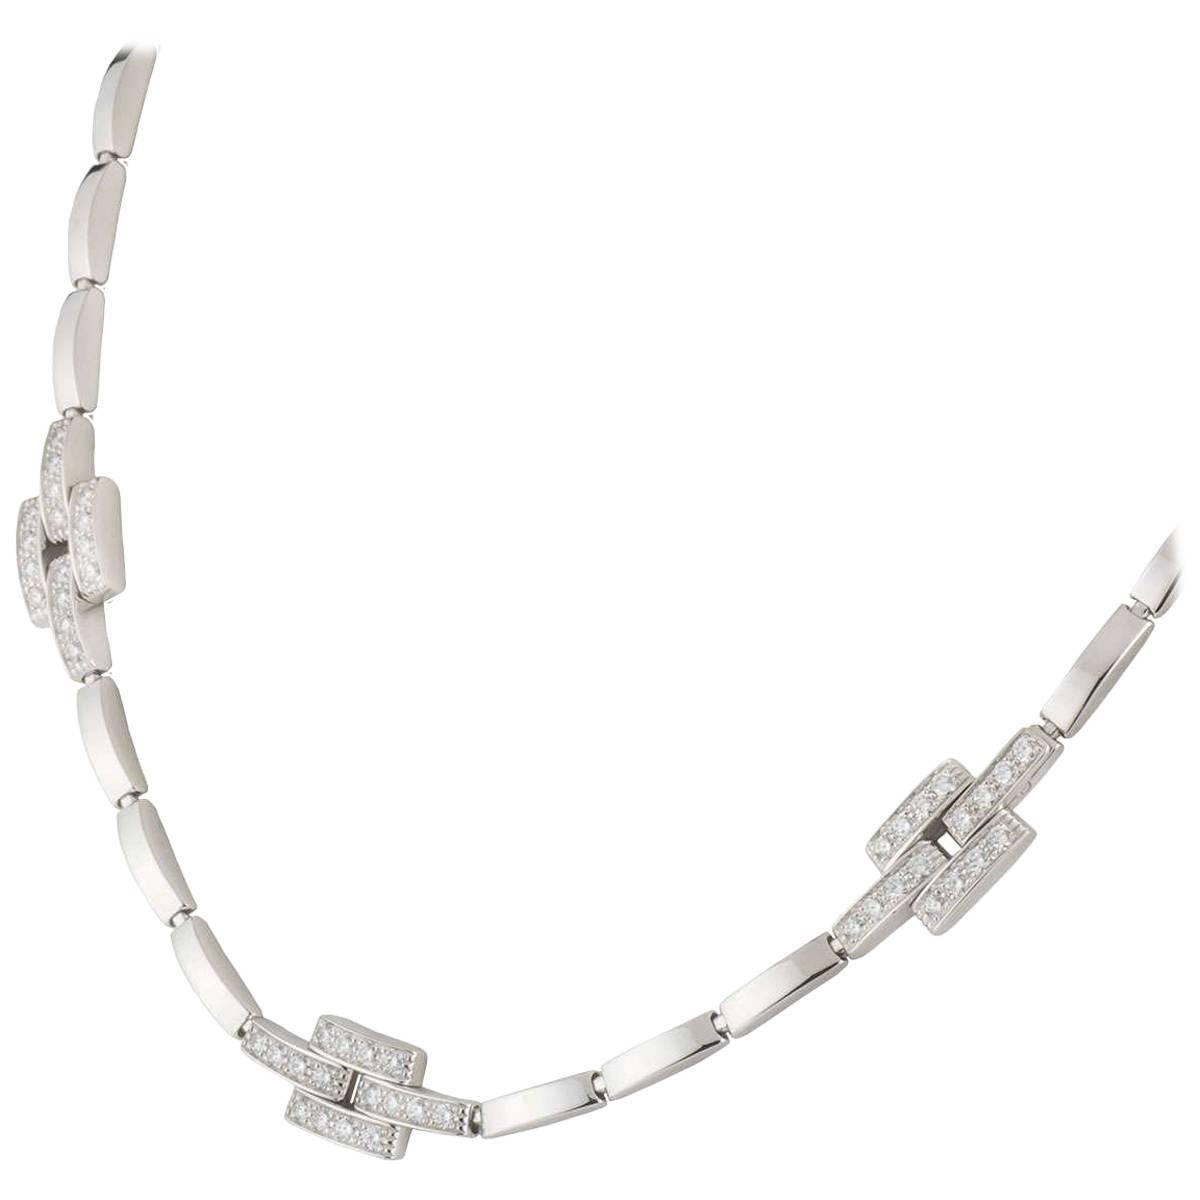 A beautiful 18k white gold Cartier diamond Maillon Panthere necklace from the Links and Chains collection. The necklace comprises of 1 row of 34 white gold flexi bar links with 3 iconic Maillon links complemented with 48 round brilliant cut diamonds